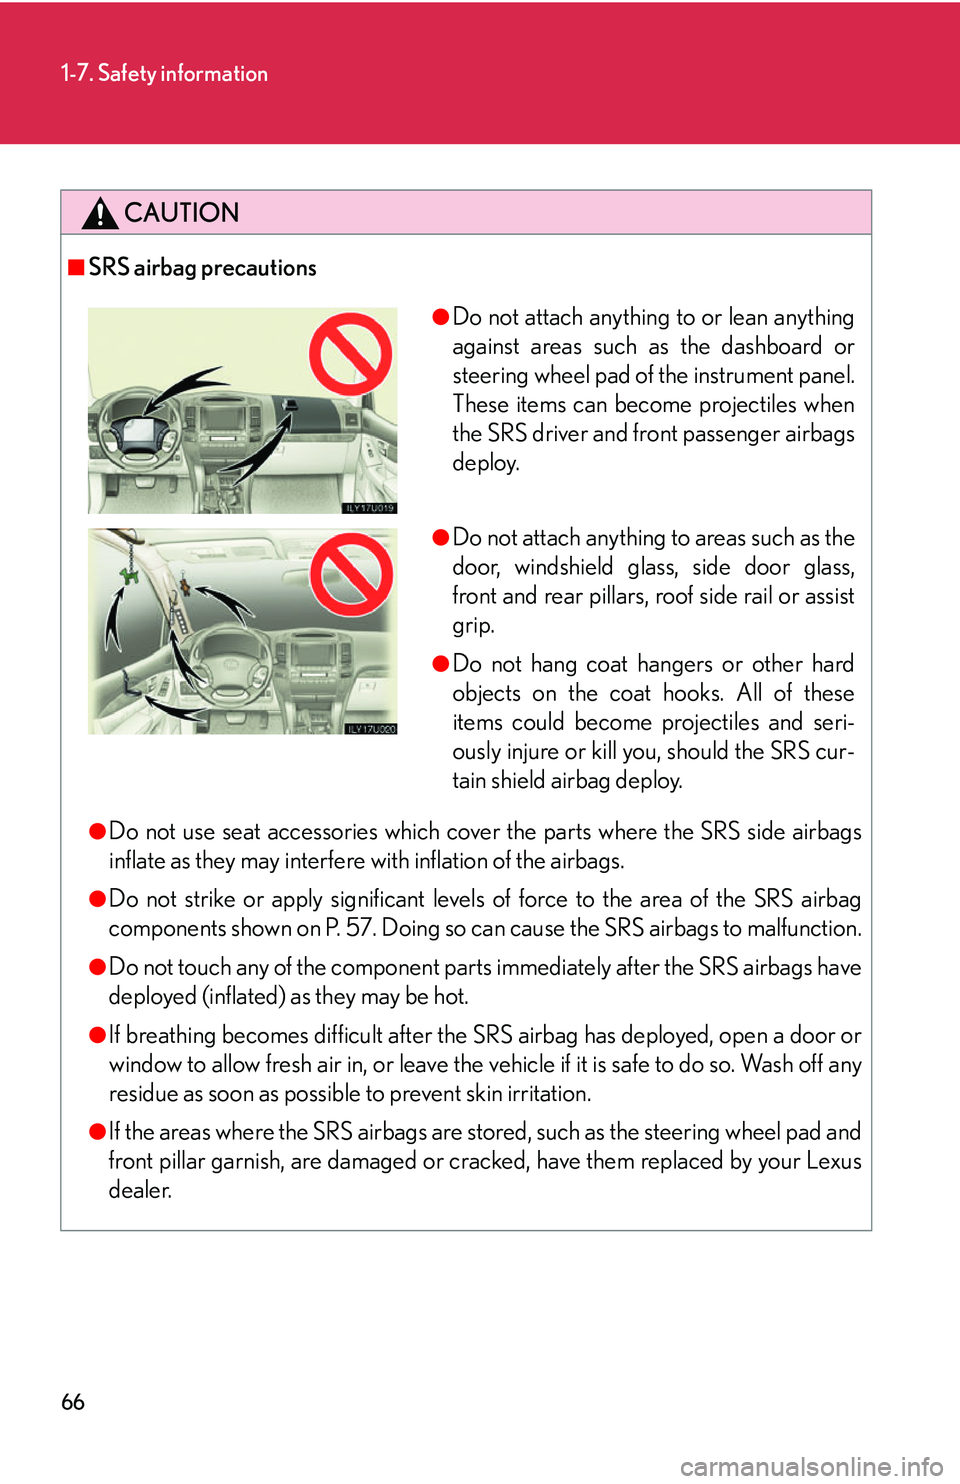 Lexus GX470 2007  Instrument cluster / LEXUS 2007 GX470 OWNERS MANUAL (OM60C64U) 66
1-7. Safety information
CAUTION
■SRS airbag precautions
●Do not use seat accessories which cover the parts where the SRS side airbags
inflate as they may interfere with inflation of the airbags